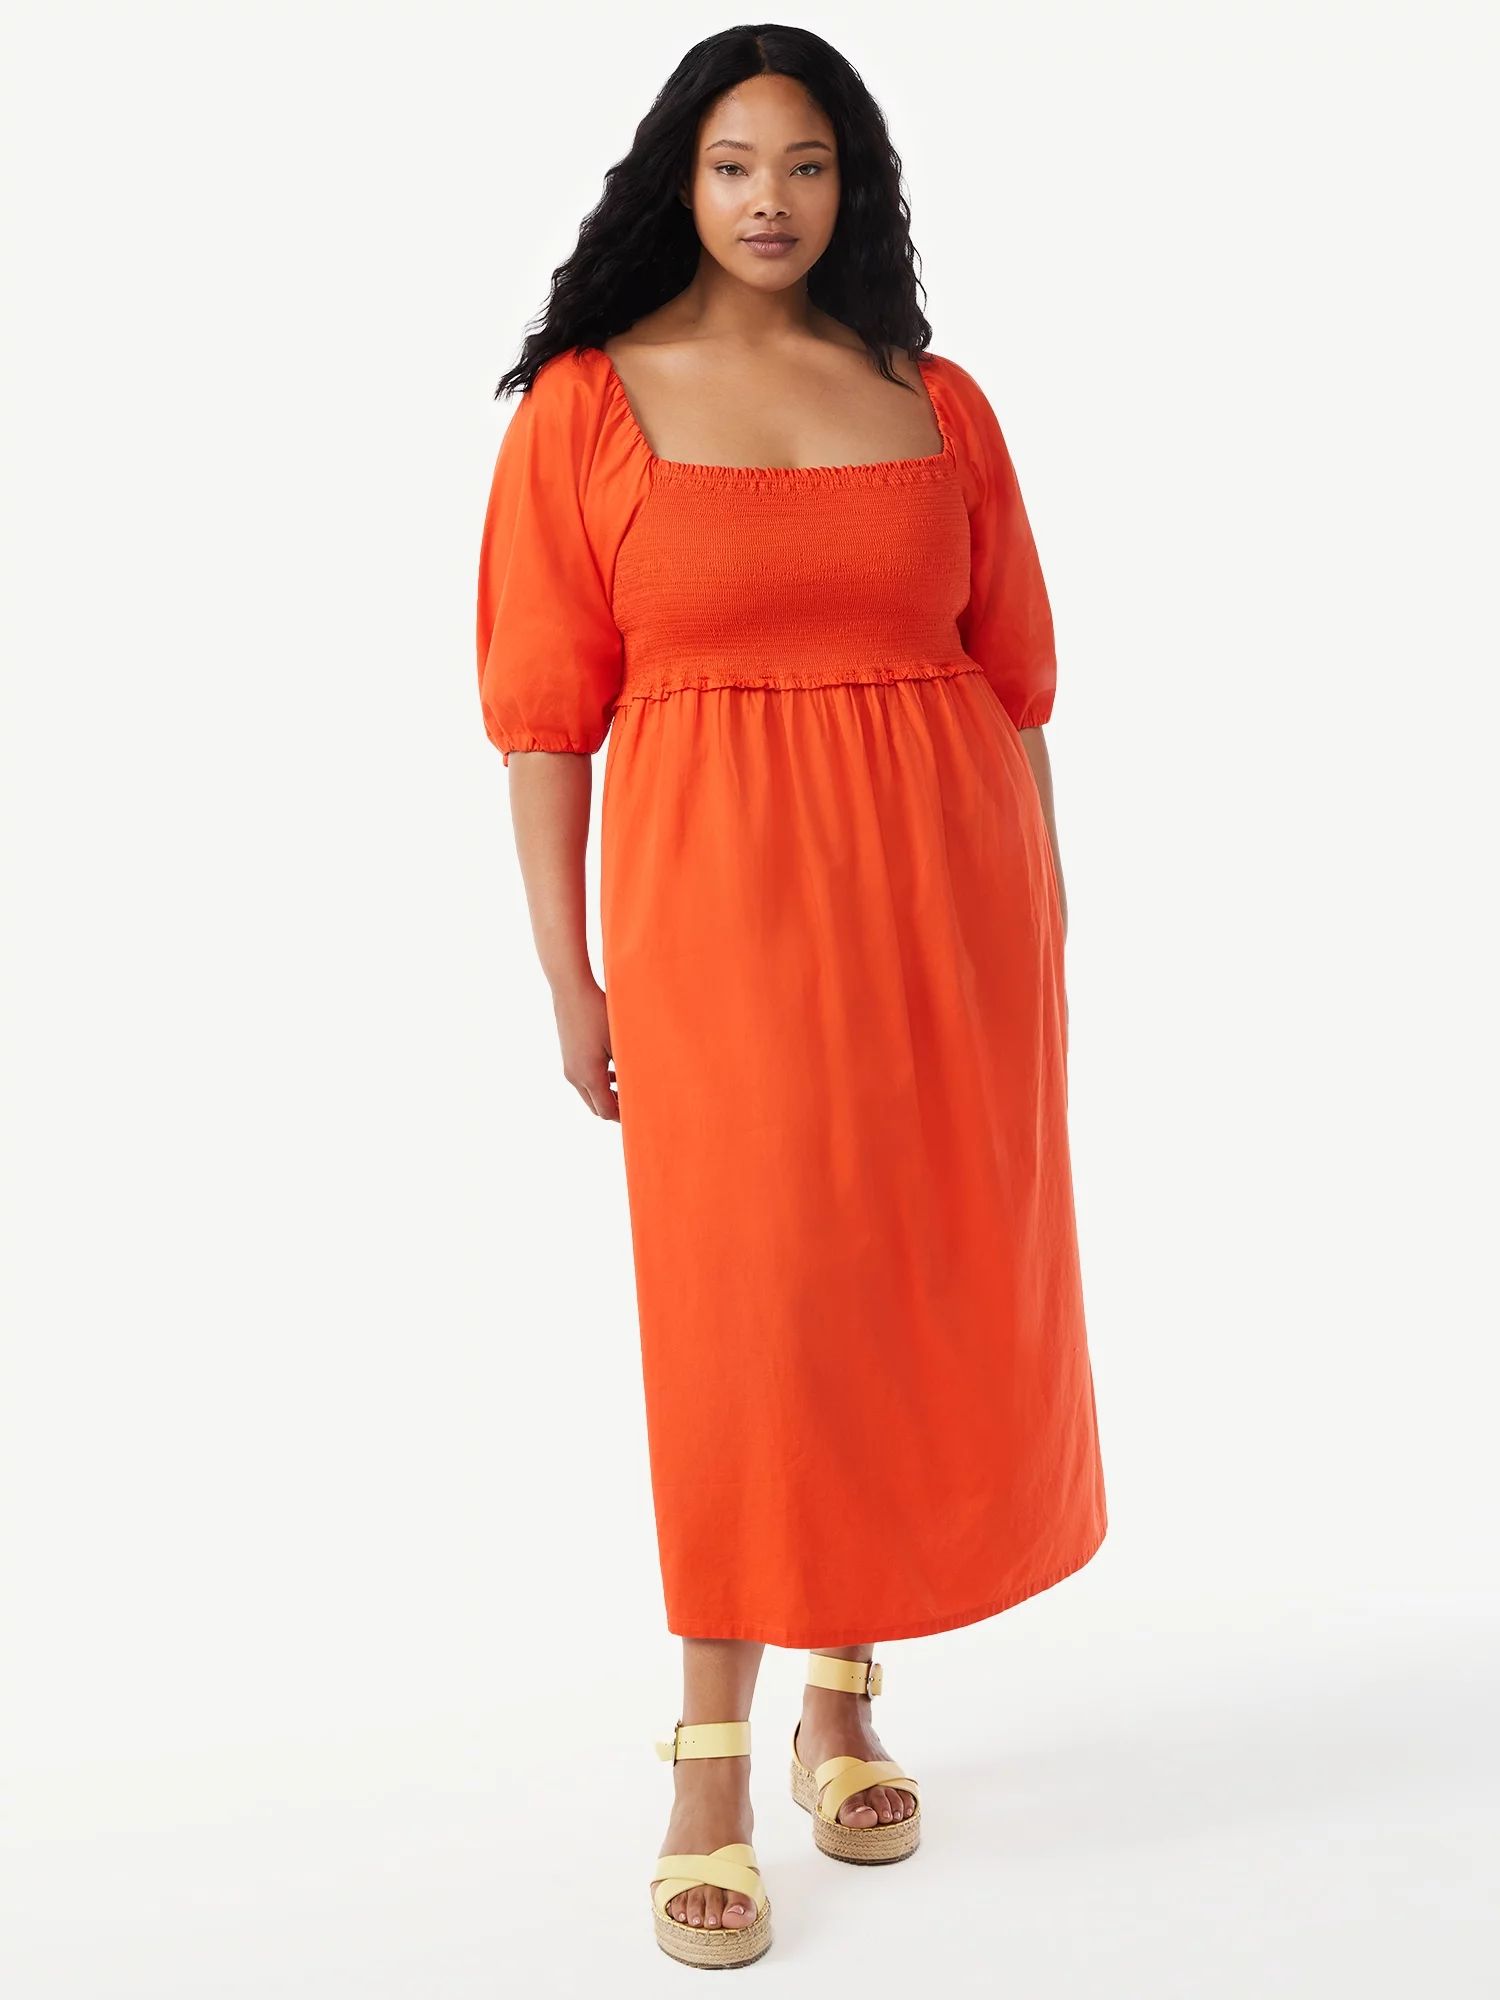 Free Assembly Women's Smocked Midi Dress with Convertible Sleeves | Walmart (US)